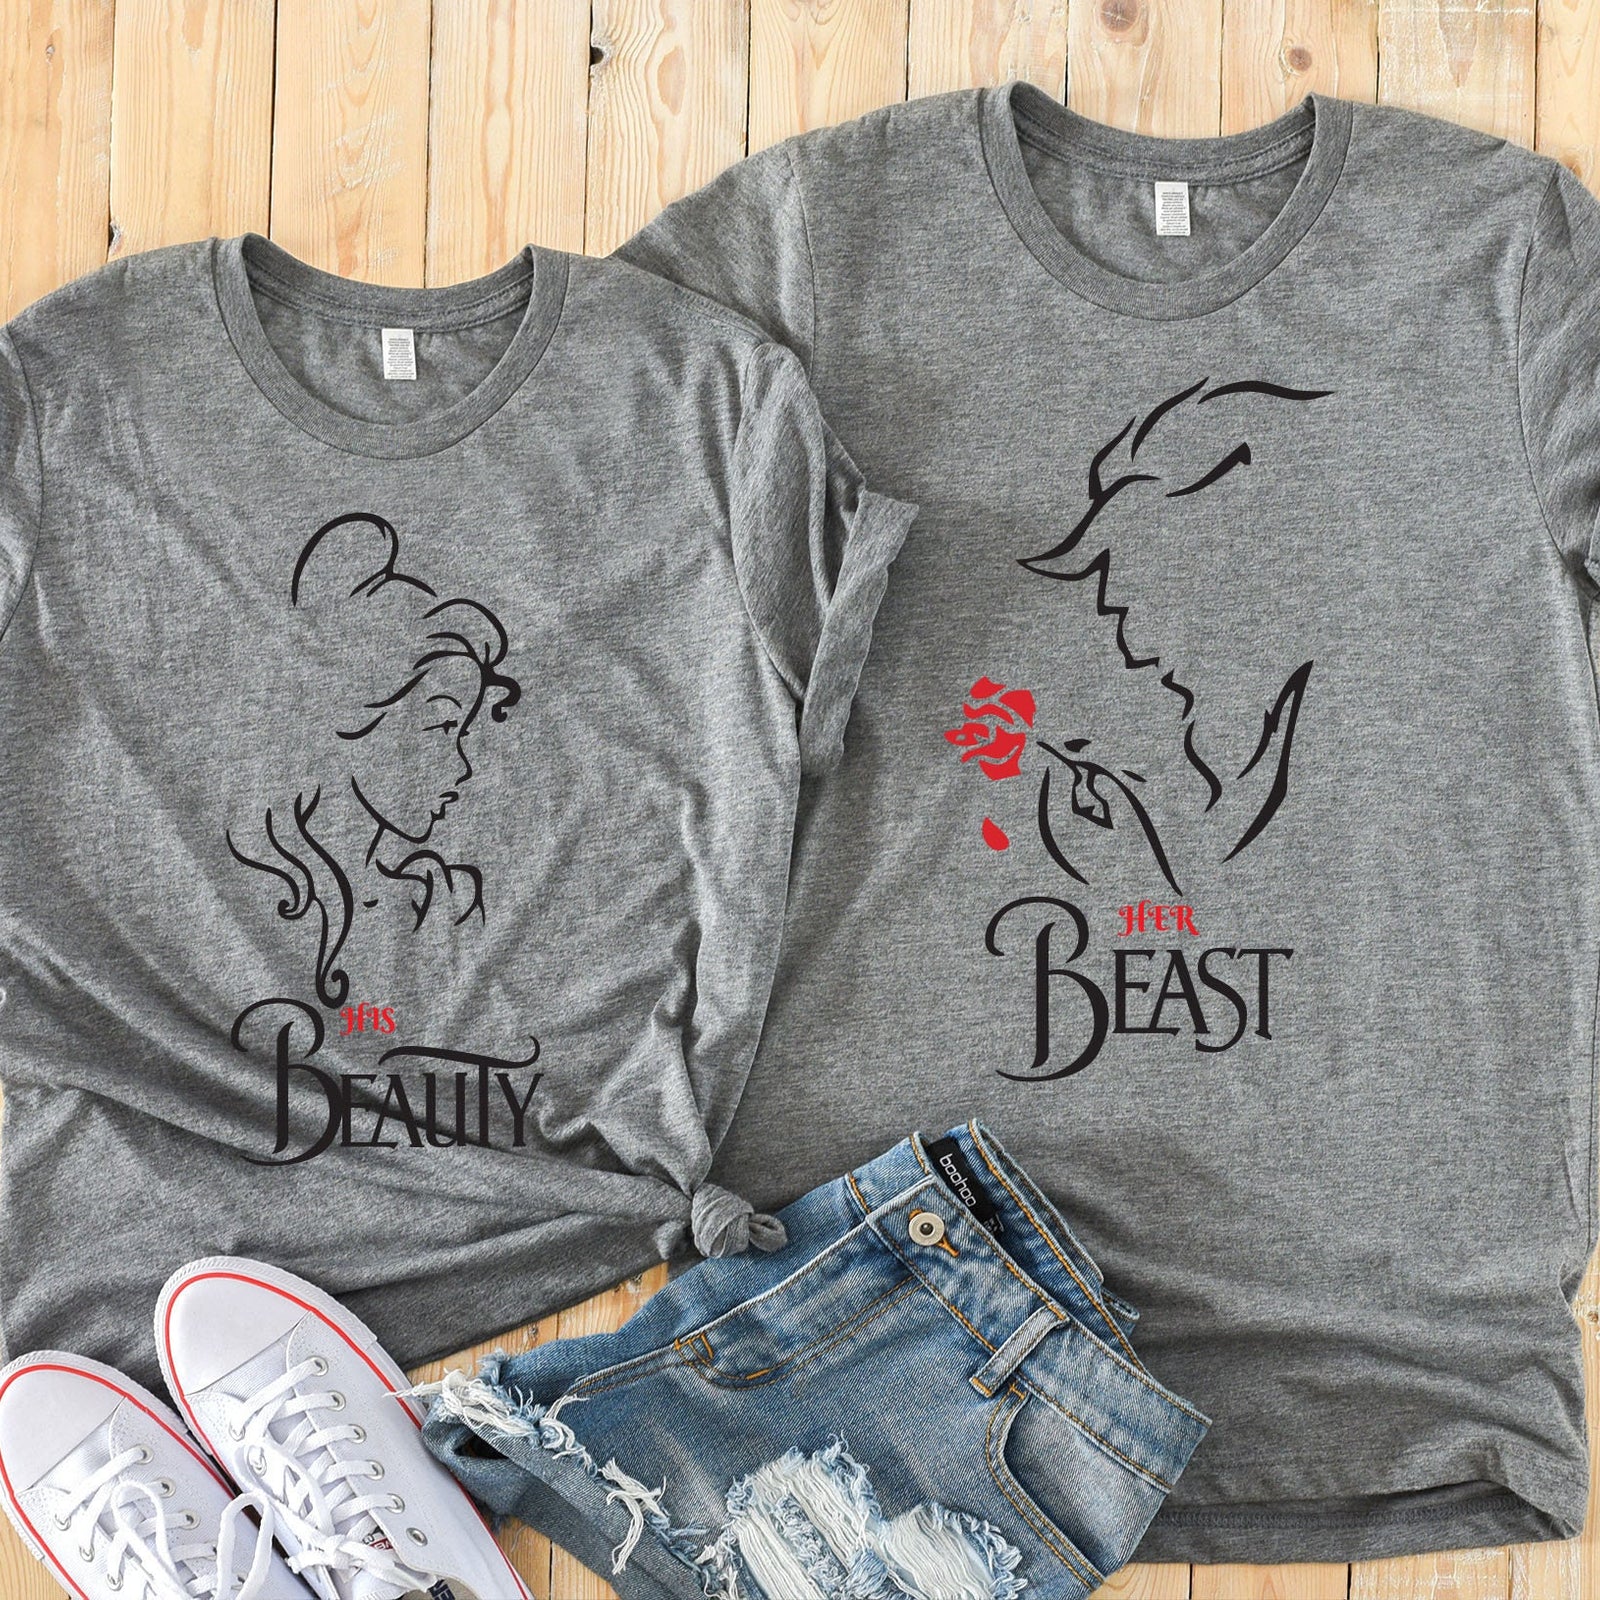 Beauty and the Beast - Her Beast and His Beauty Disney Couples Shirts - Matching Disney Shirts